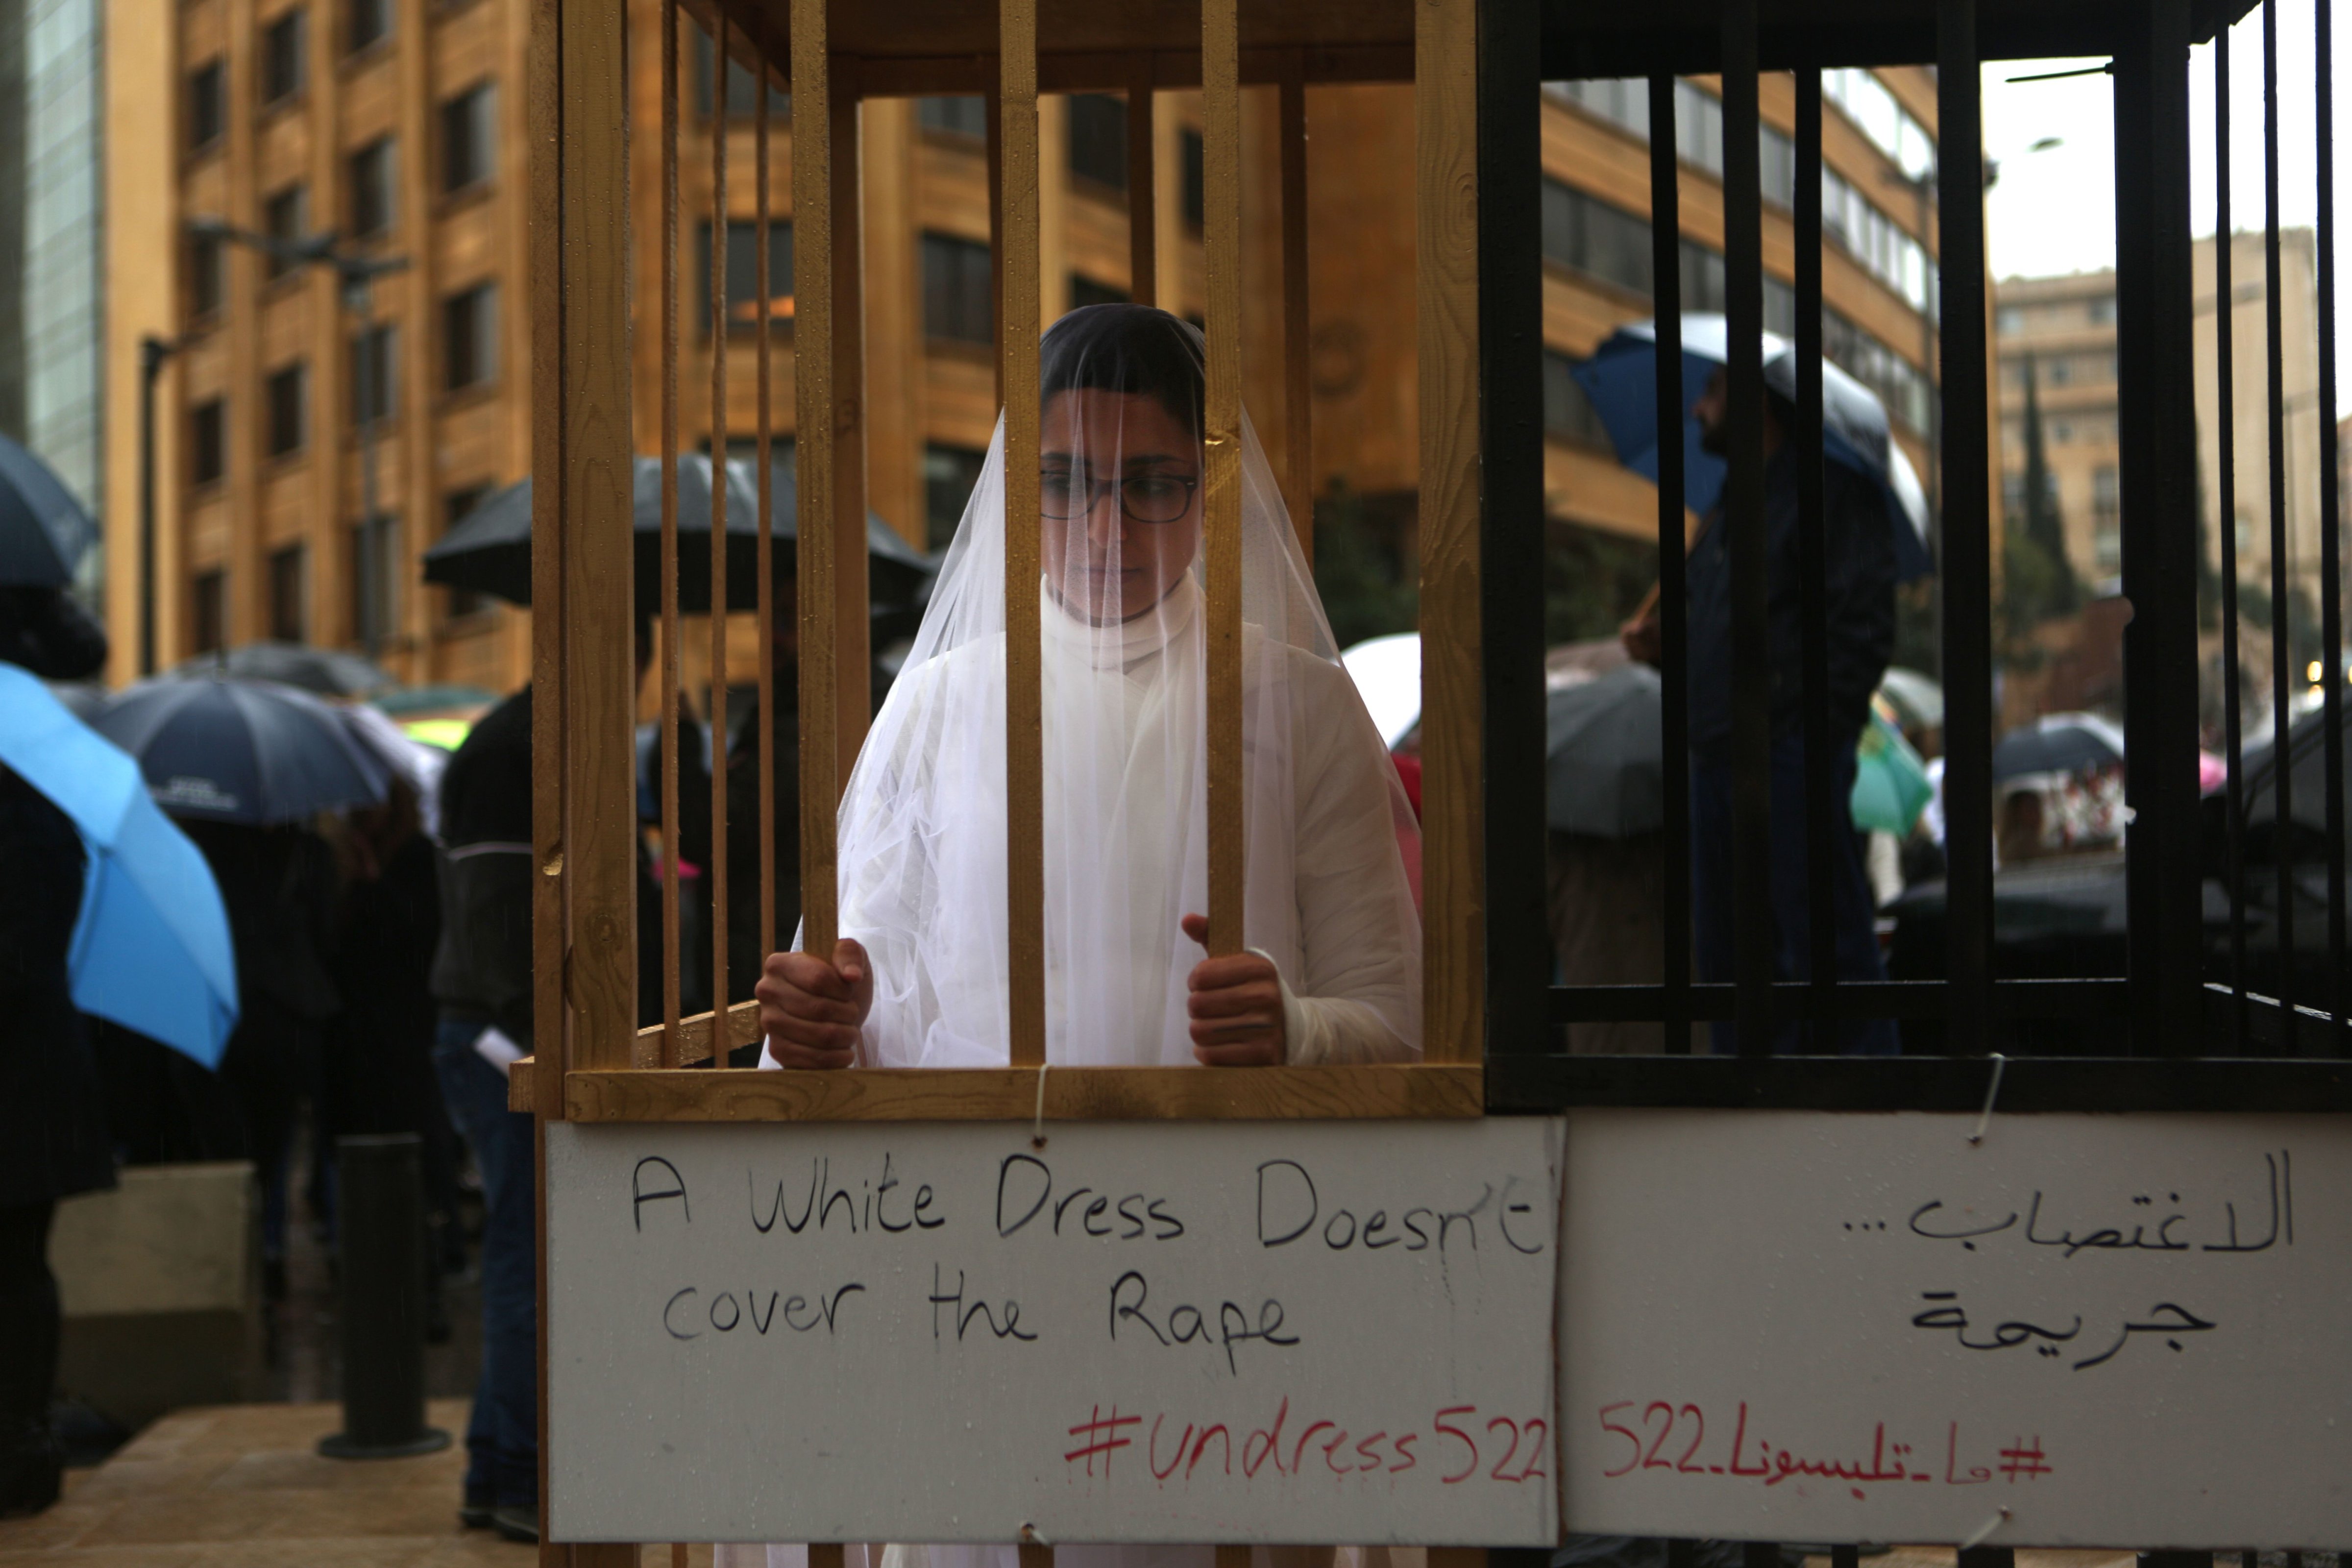 An activist from the Lebanese NGO Abaad dressed as a bride and wearing bandages during a protest near the parliament in downtown Beirut on March 15, 2017. (Patrick Baz—AFP/Getty Images)